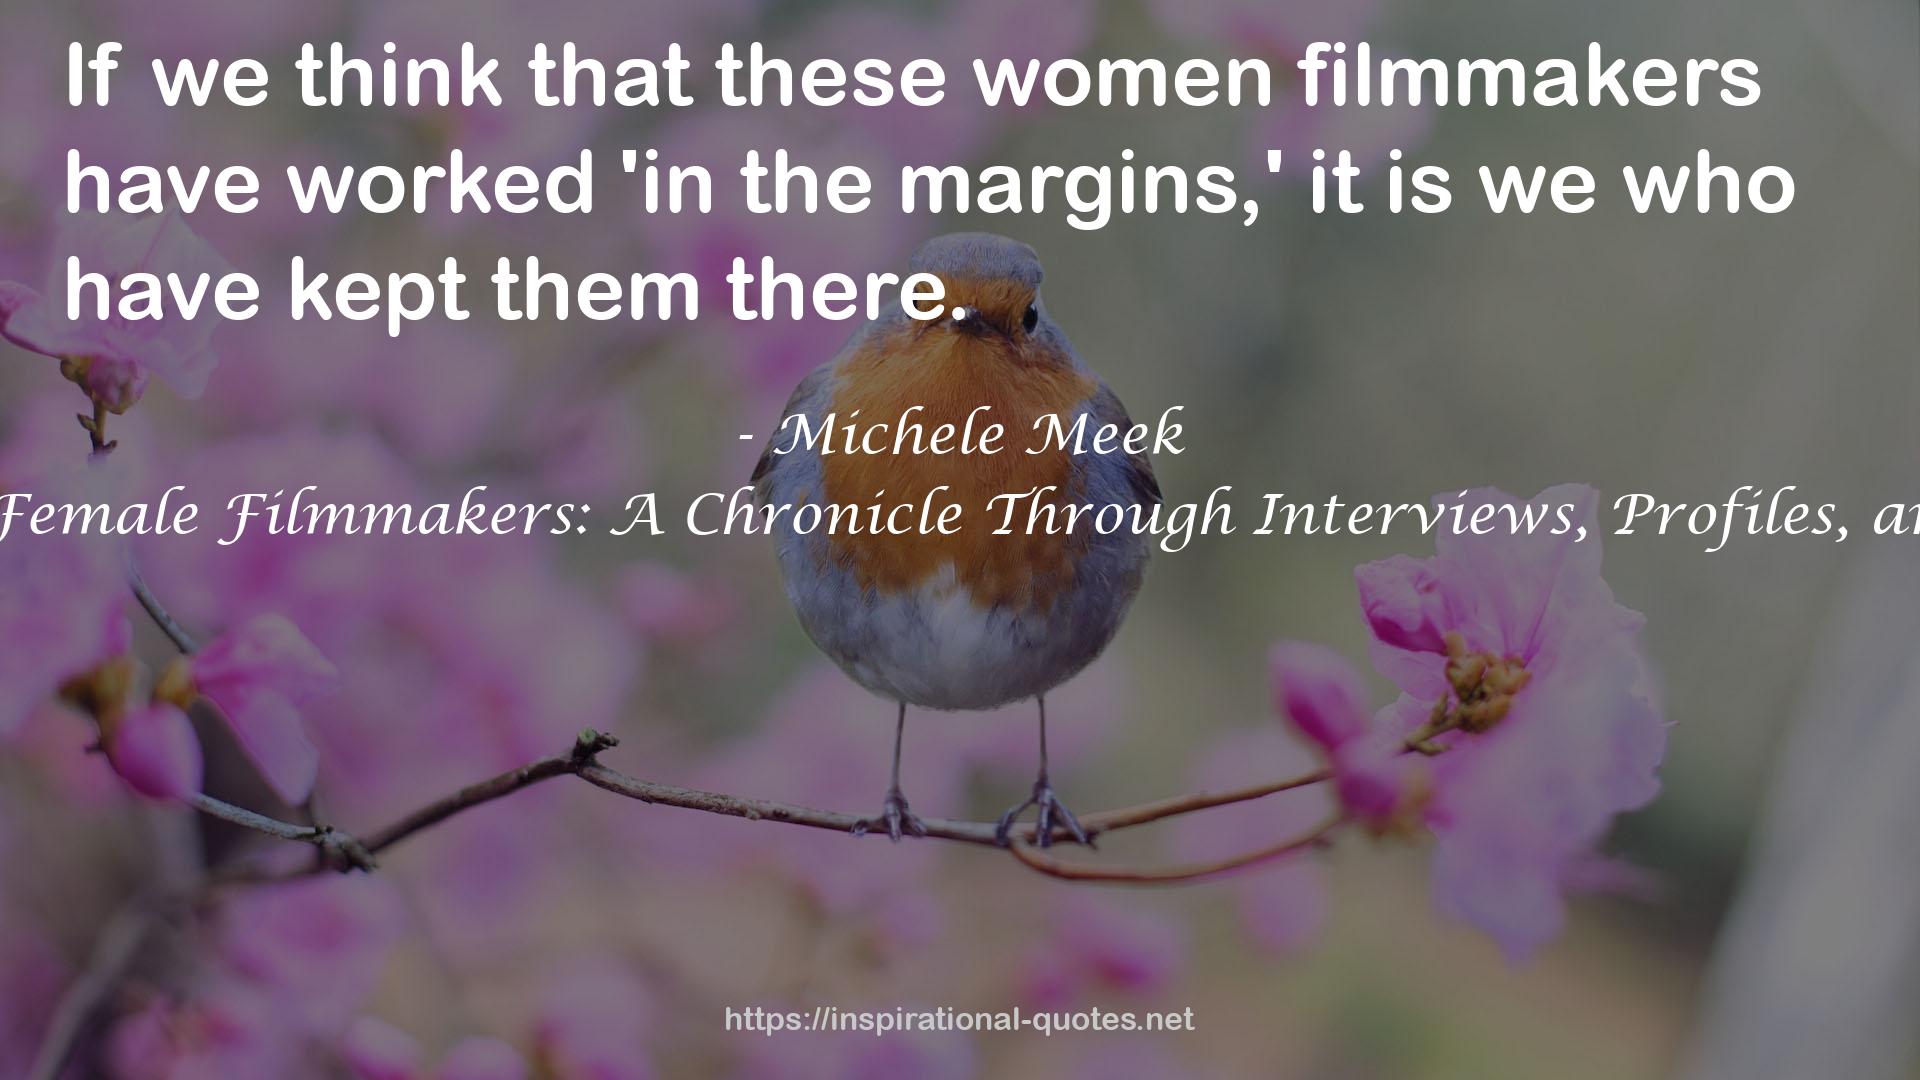 Michele Meek QUOTES